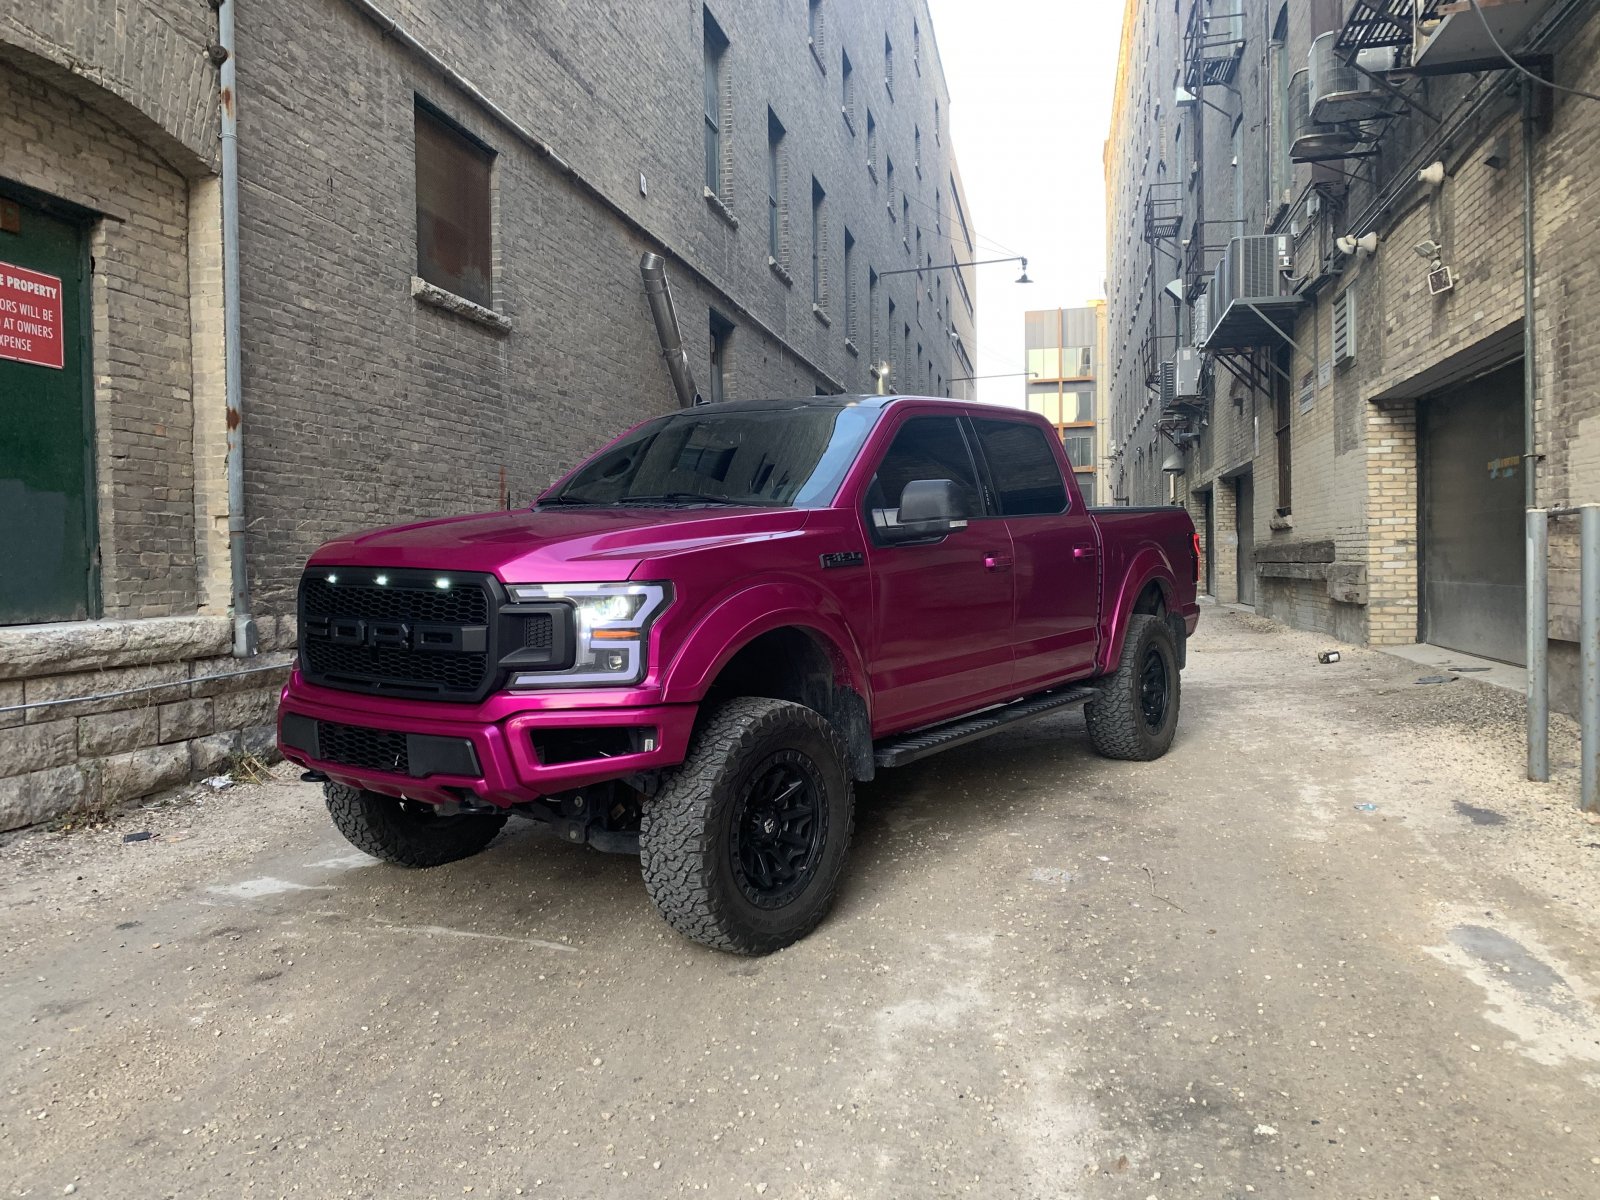 2020 Ford F-150 Lifted FX4 With Unique Color 6.jpeg